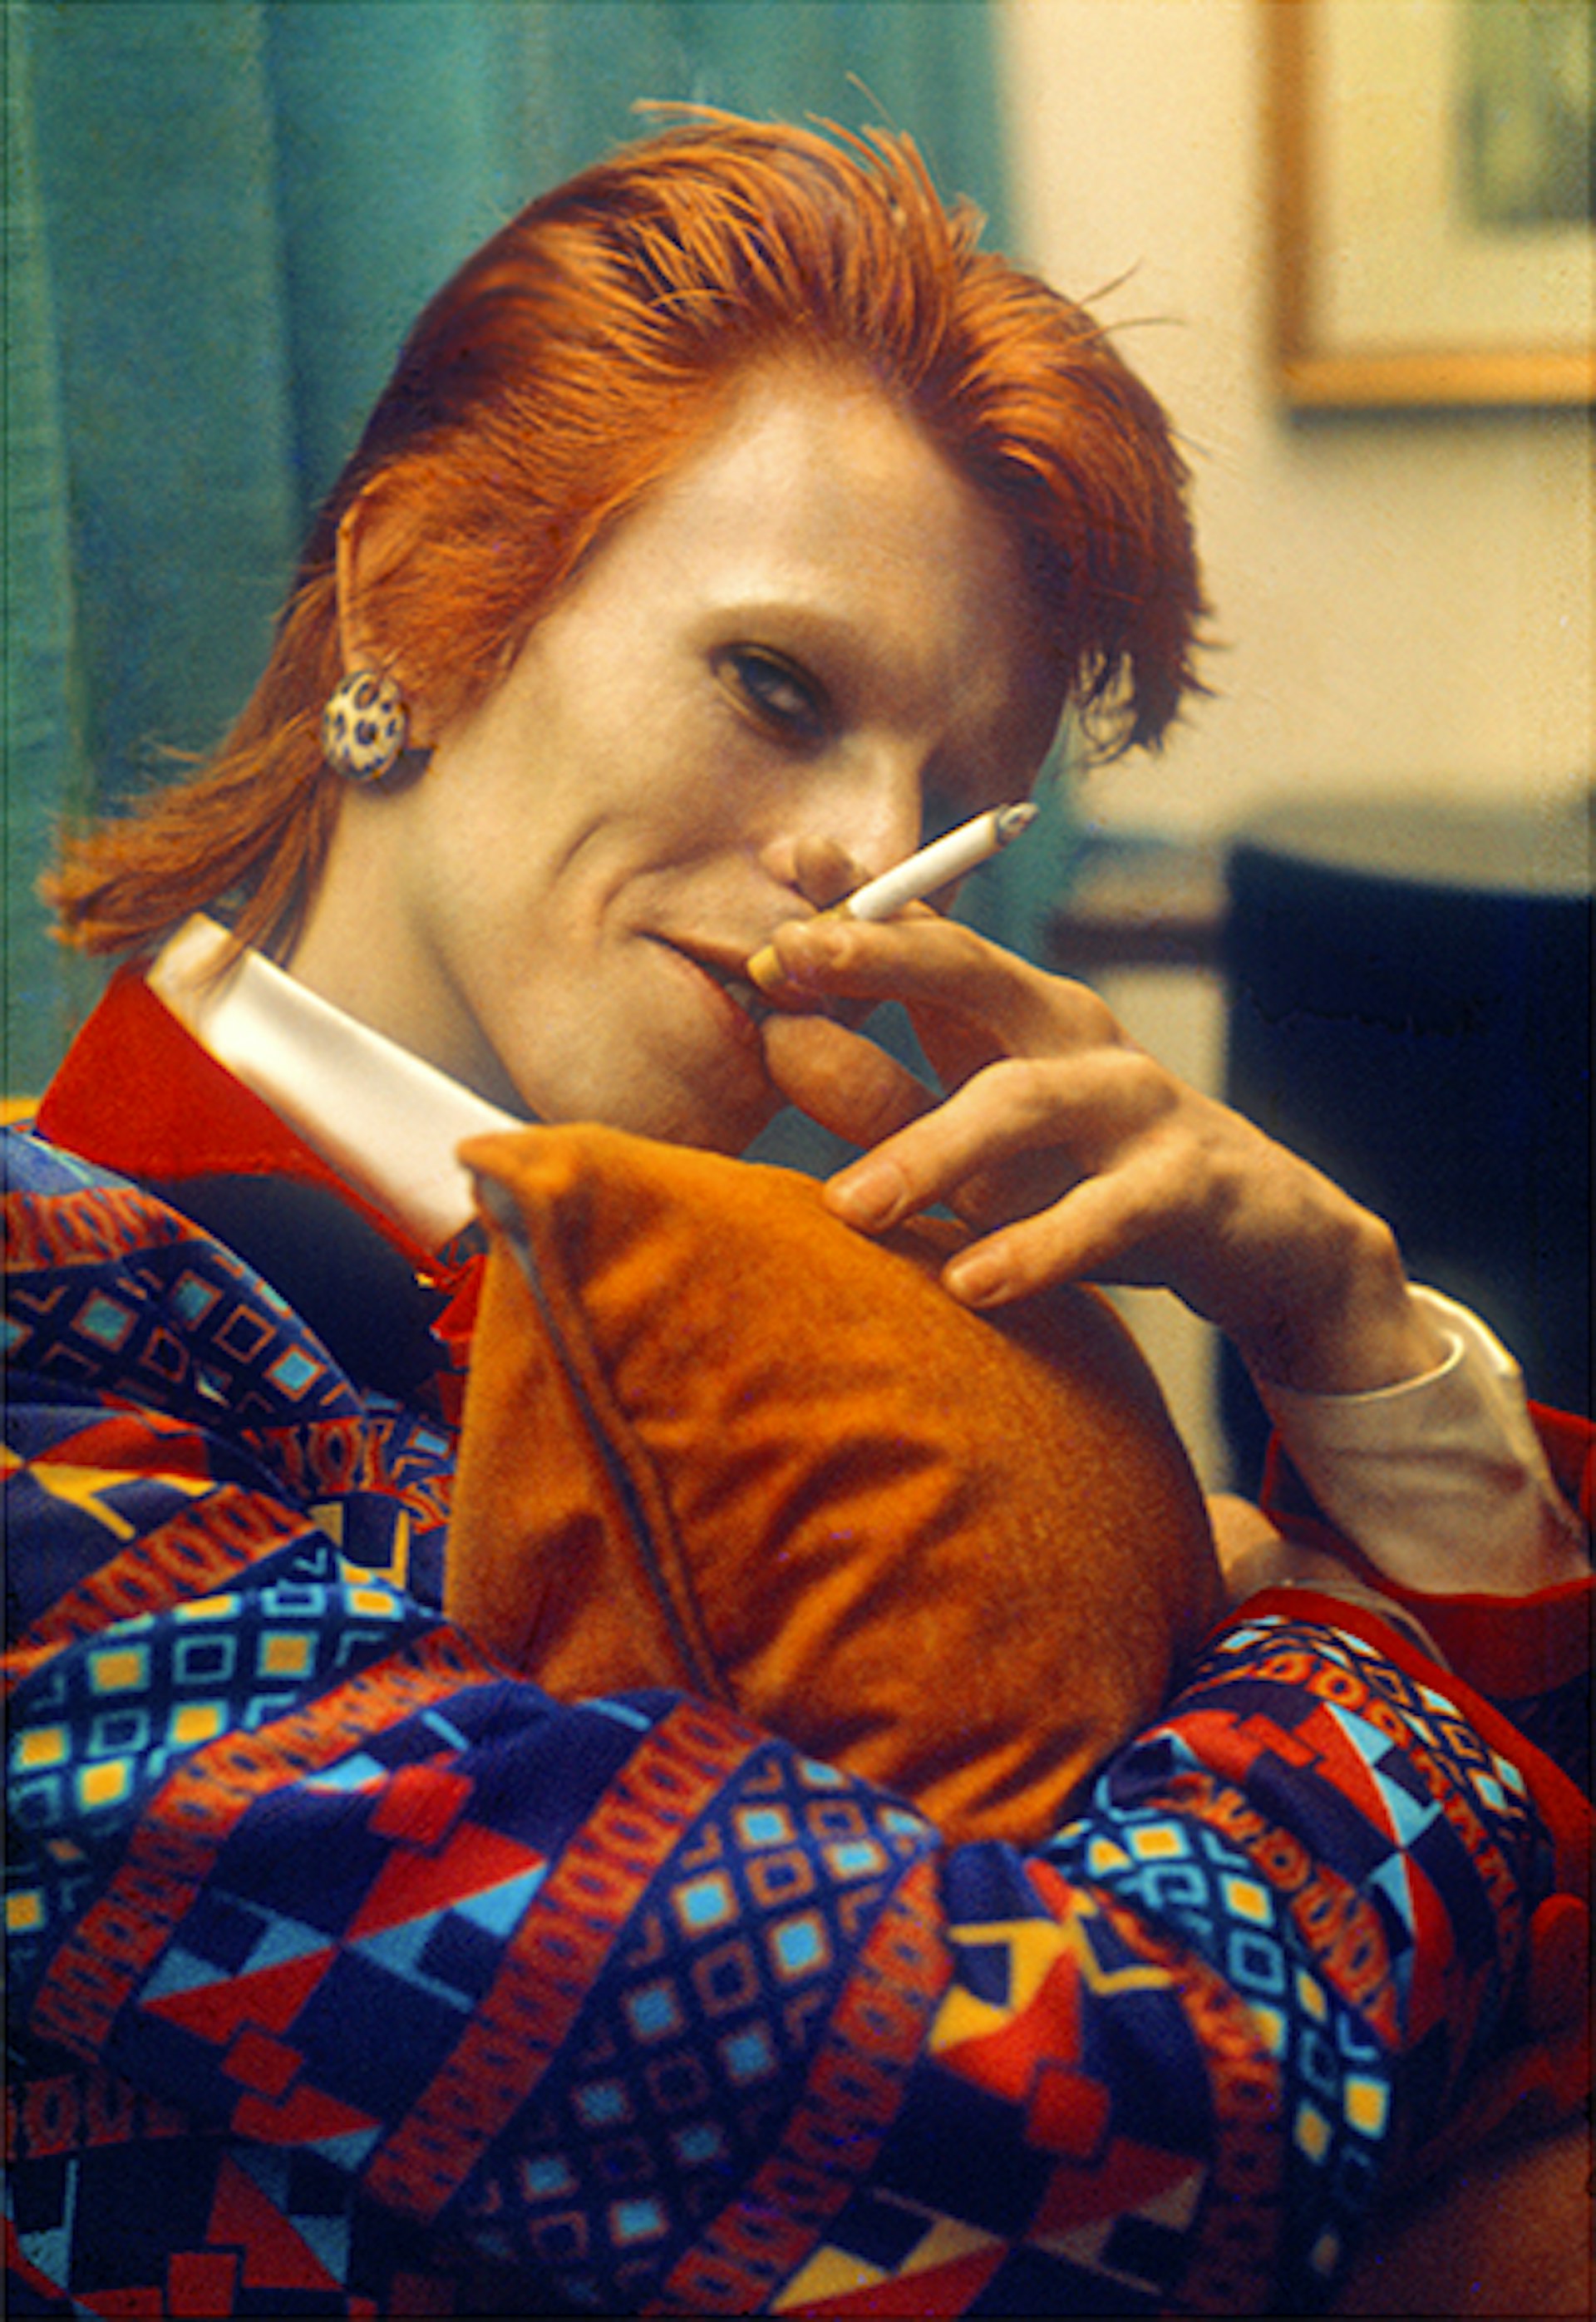 Bowie with cigarette, Queen 2 liner, UK, 1973, © Mick Rock / courtesy The Print Room 